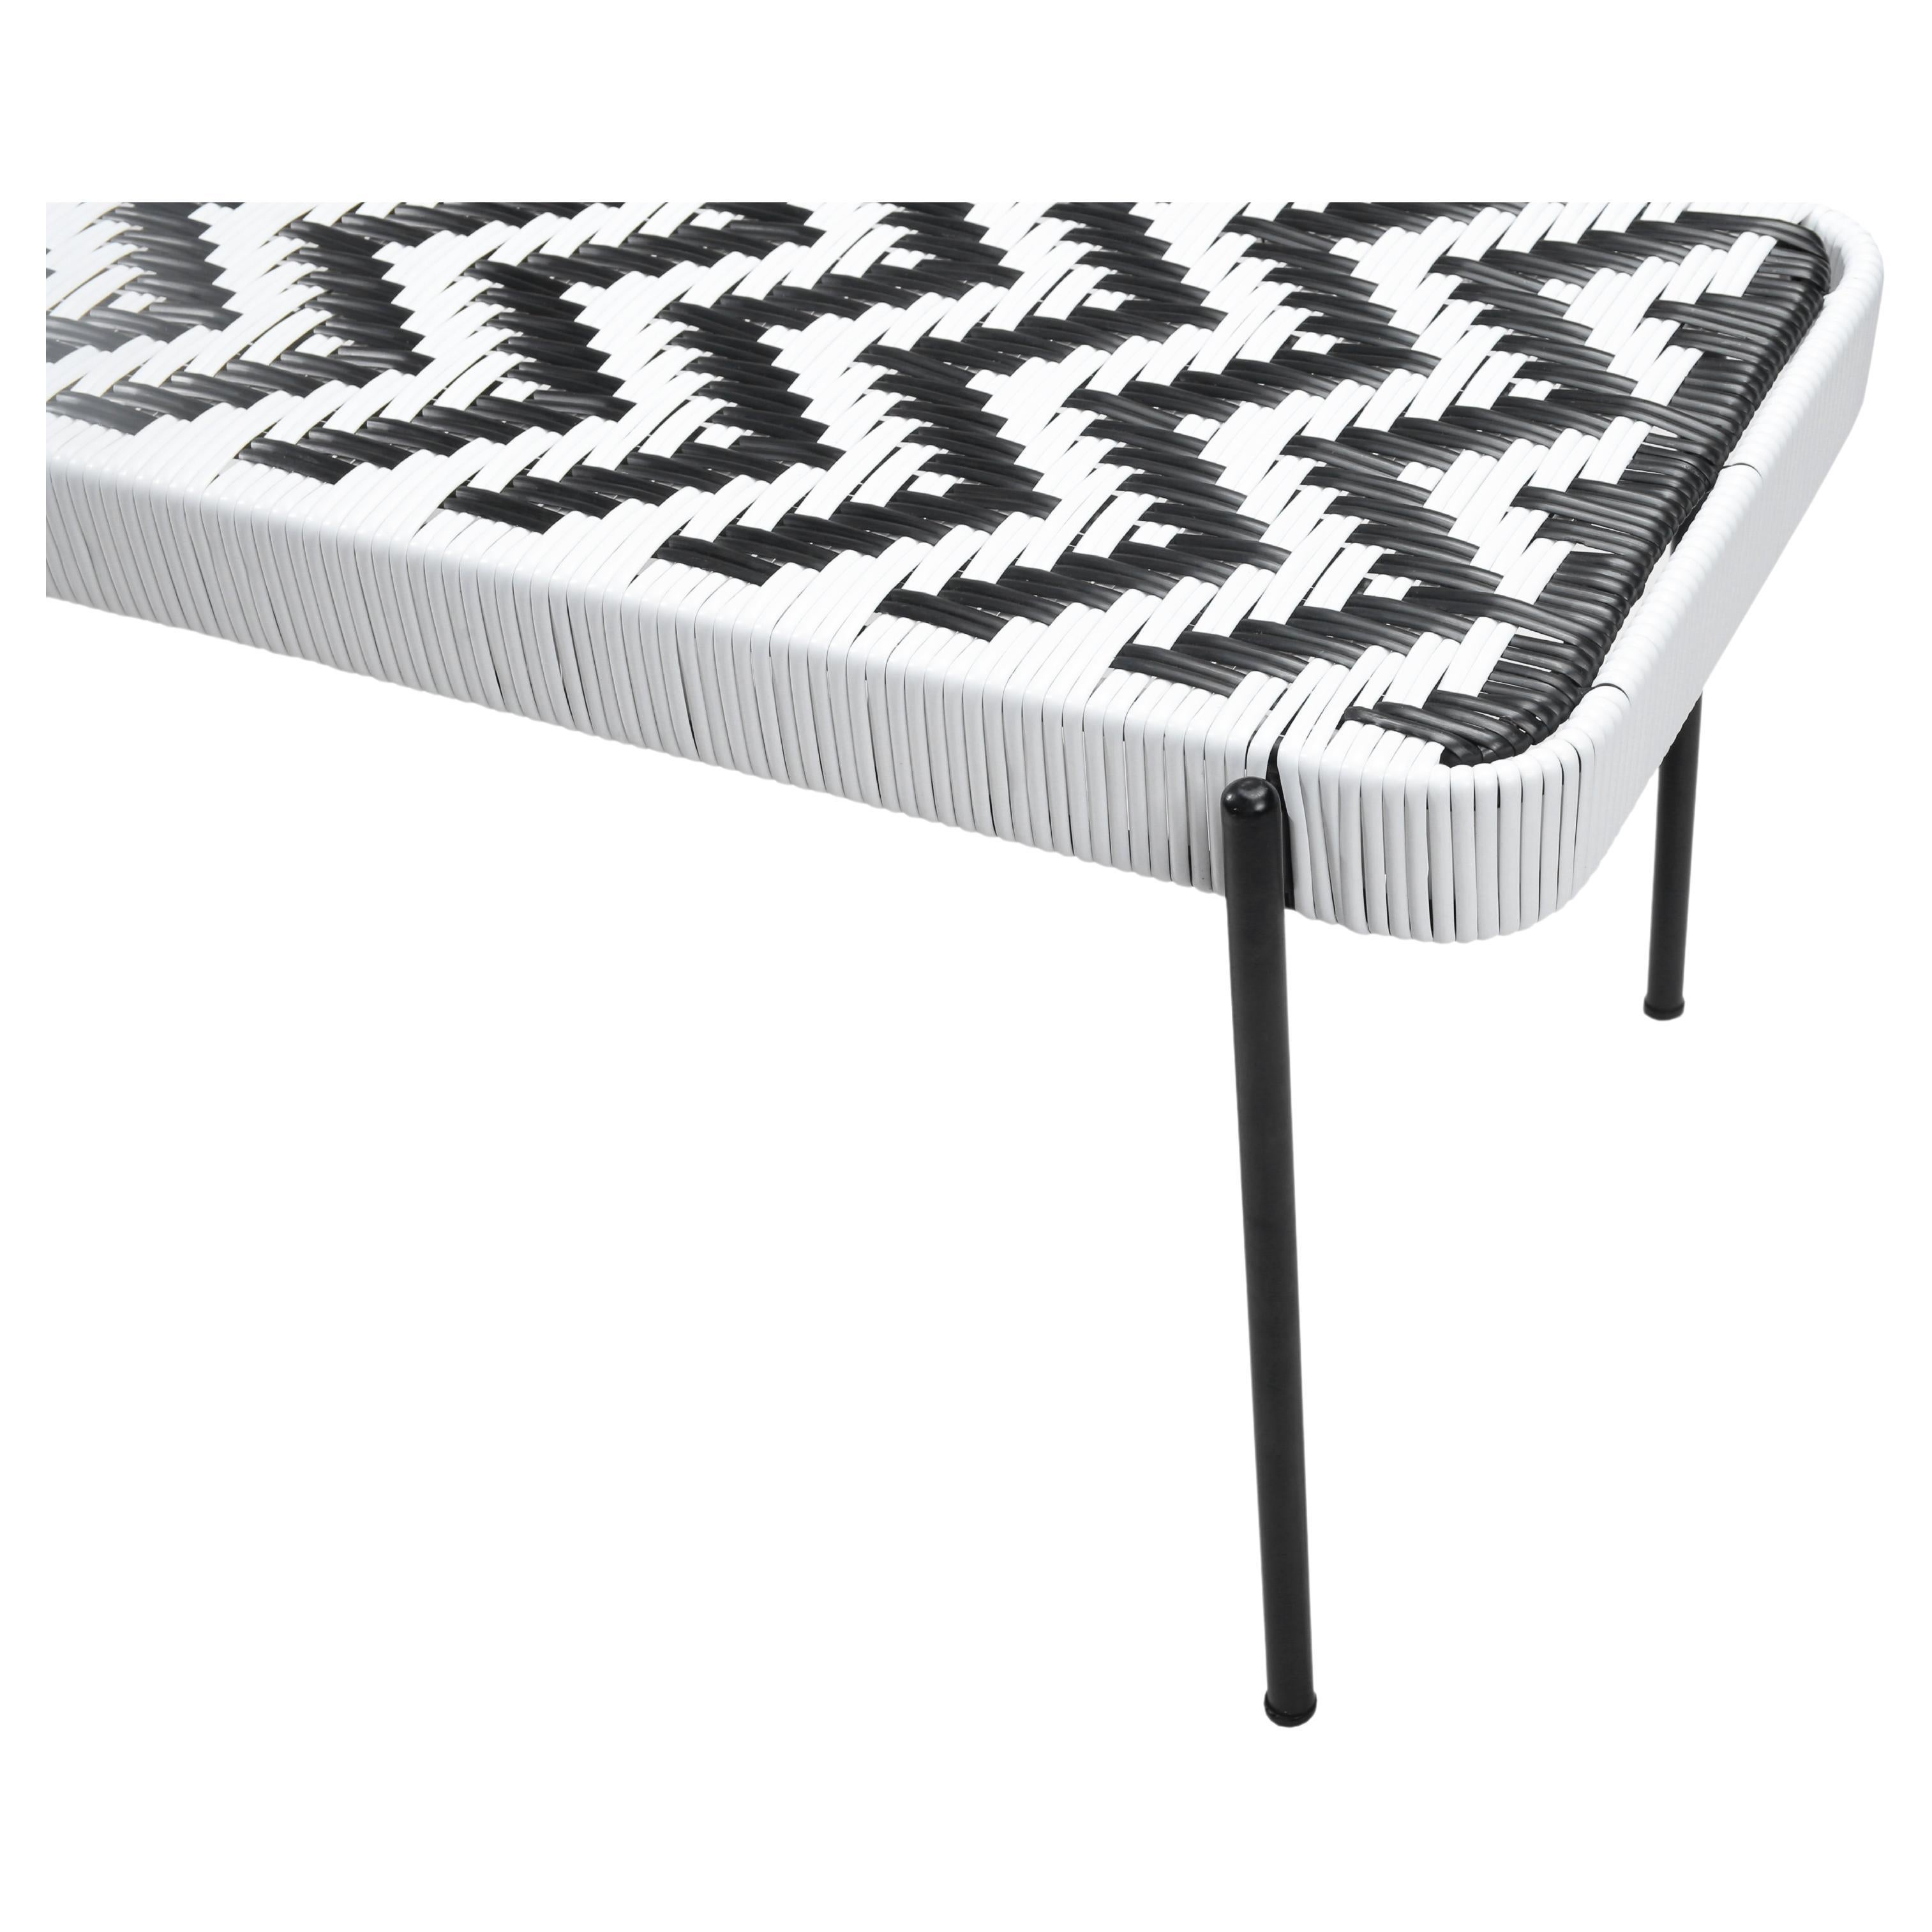 Inspired by traditional weaving patterns and clean contemporary architecture, Cher bench is an elegant versatile piece as a bench seat, coffee table, console table for both indoor - outdoor space. 

Characteristics
- Indoor - outdoor
-